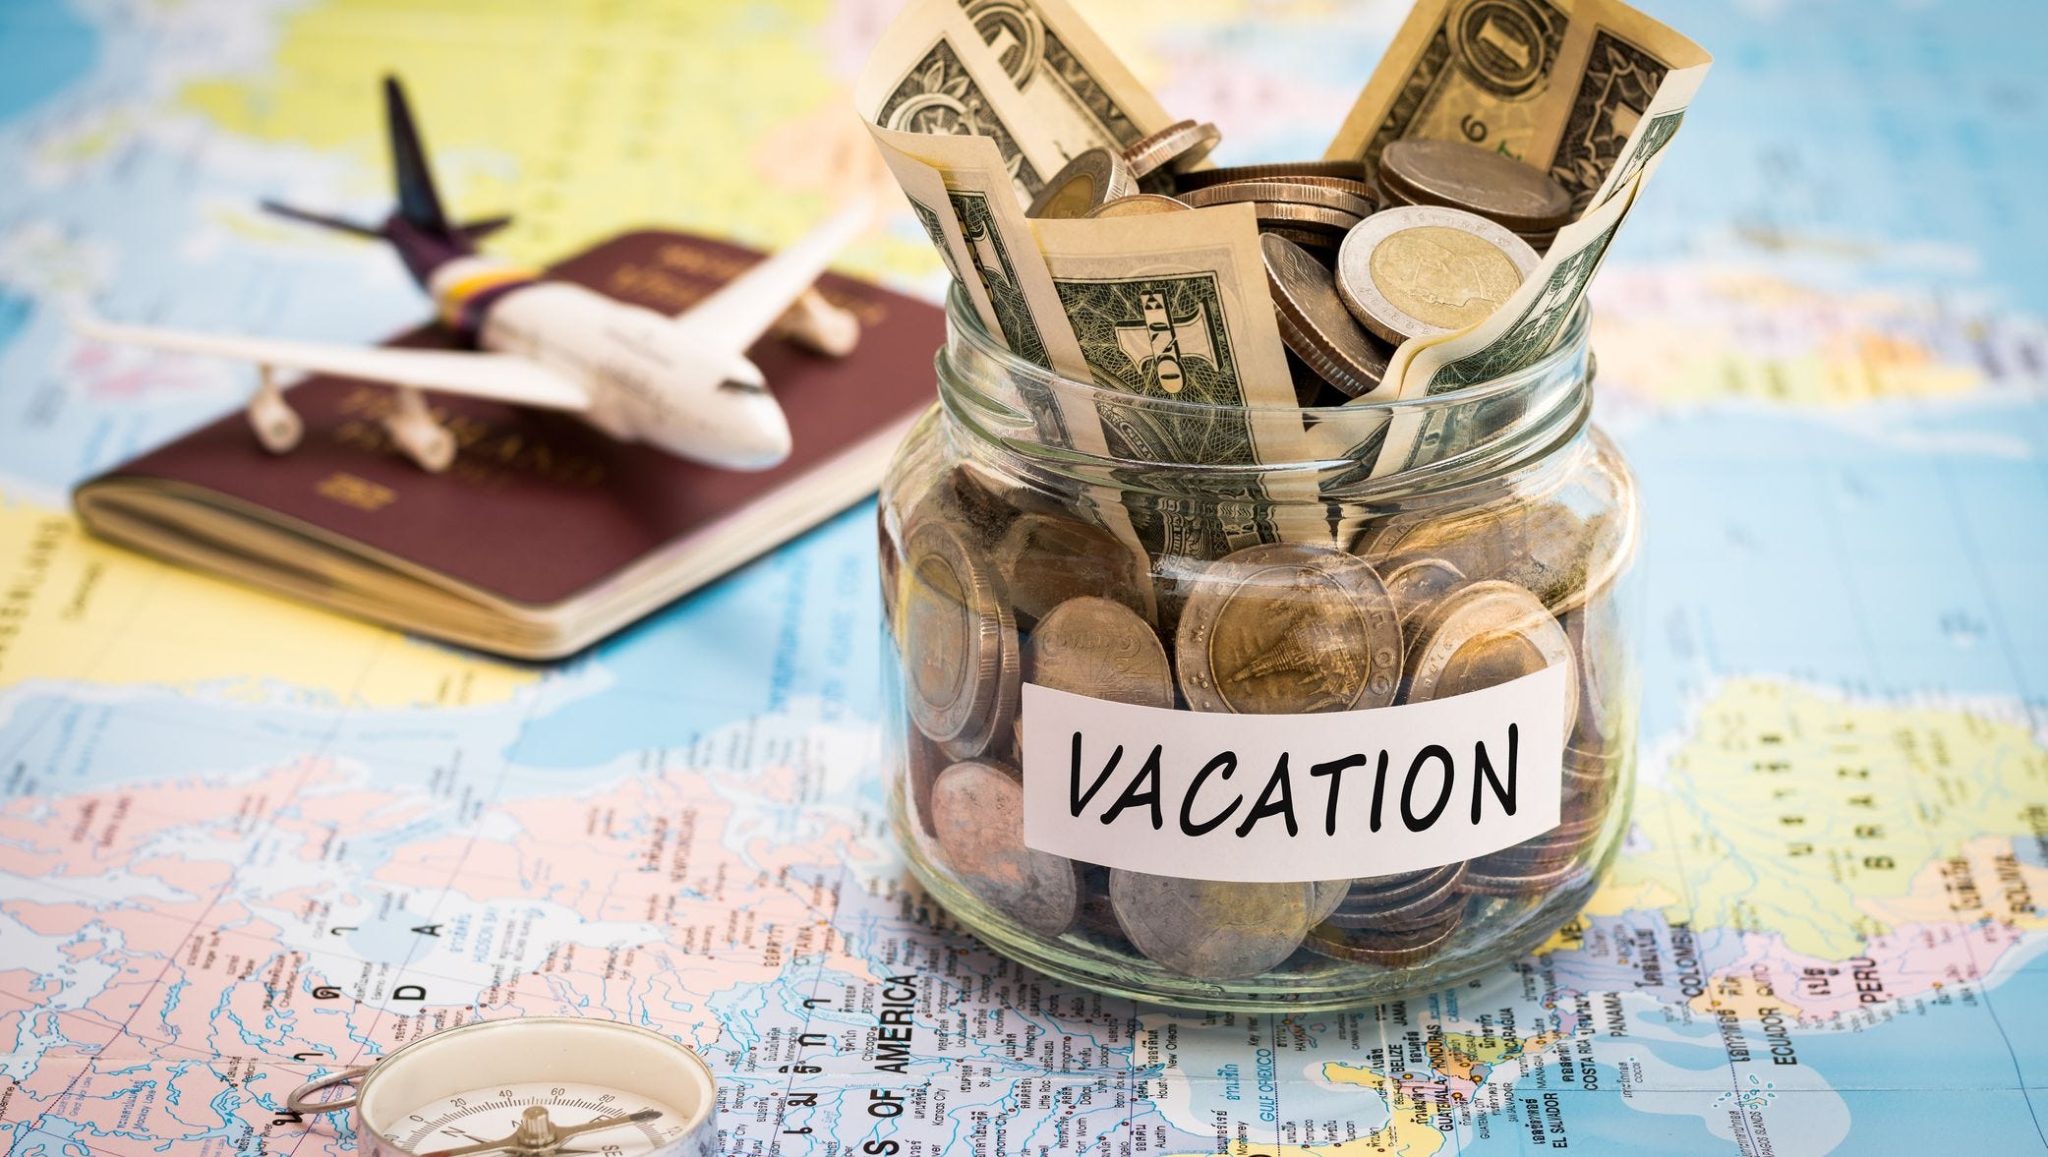 A jar filled with money and labeled 'VACATION' sits on top of a detailed world map with a toy airplane and a compass beside it.